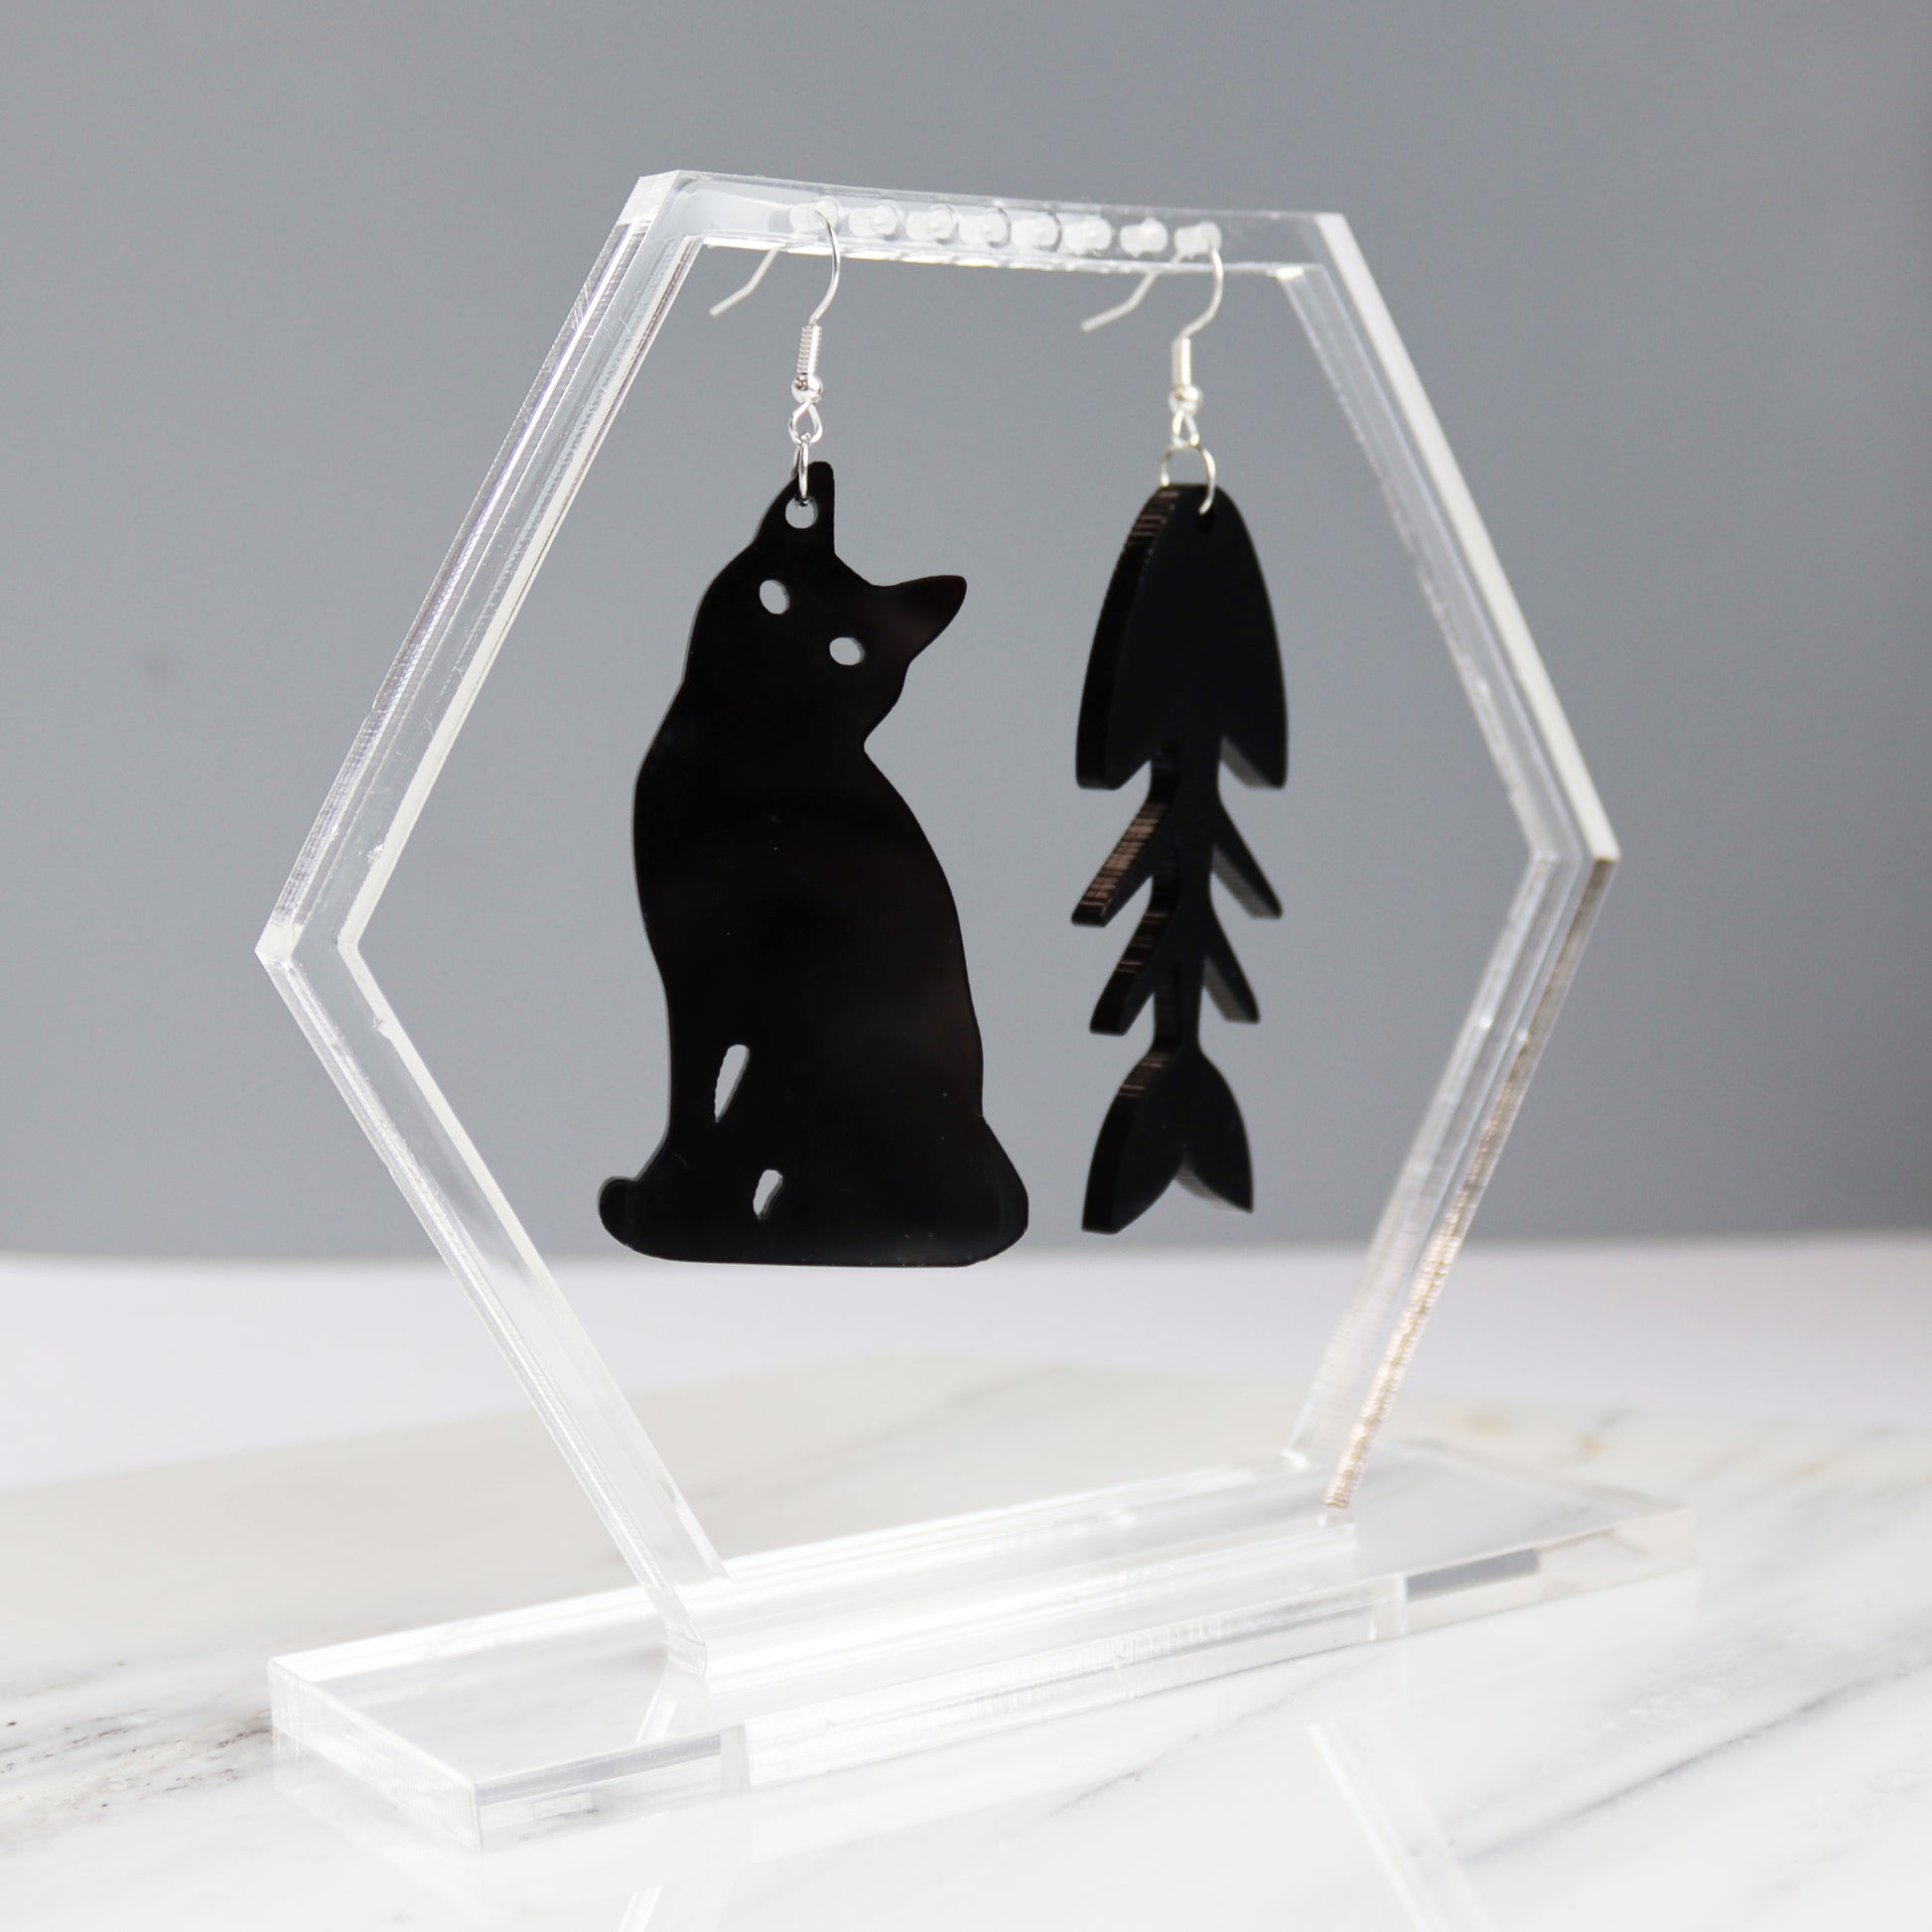 black cat and fish bone mismatches earrings cut from black acrylic shown hanging on earring display holder